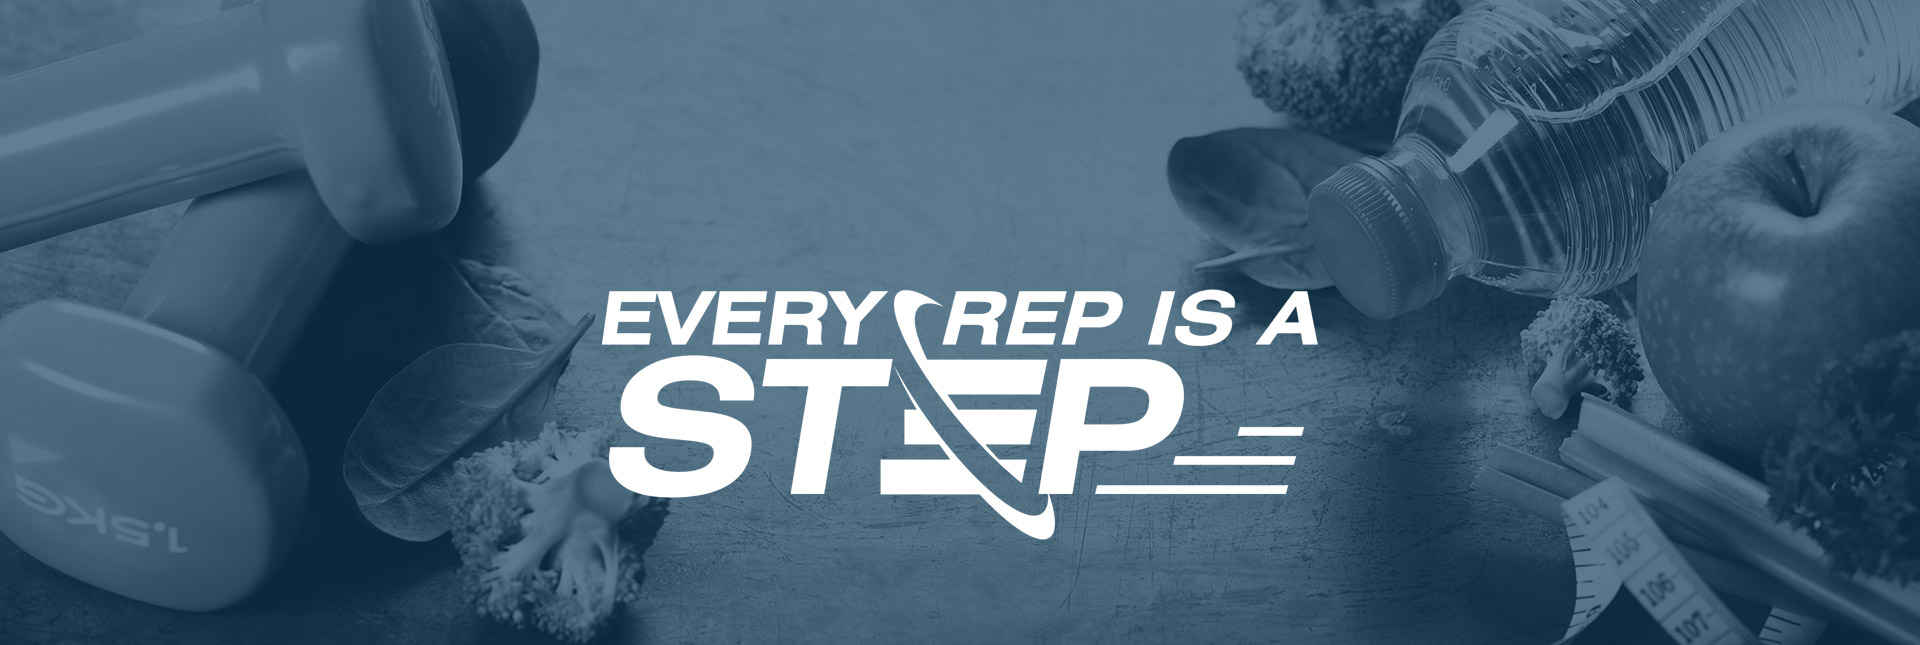 Every Rep is a Step